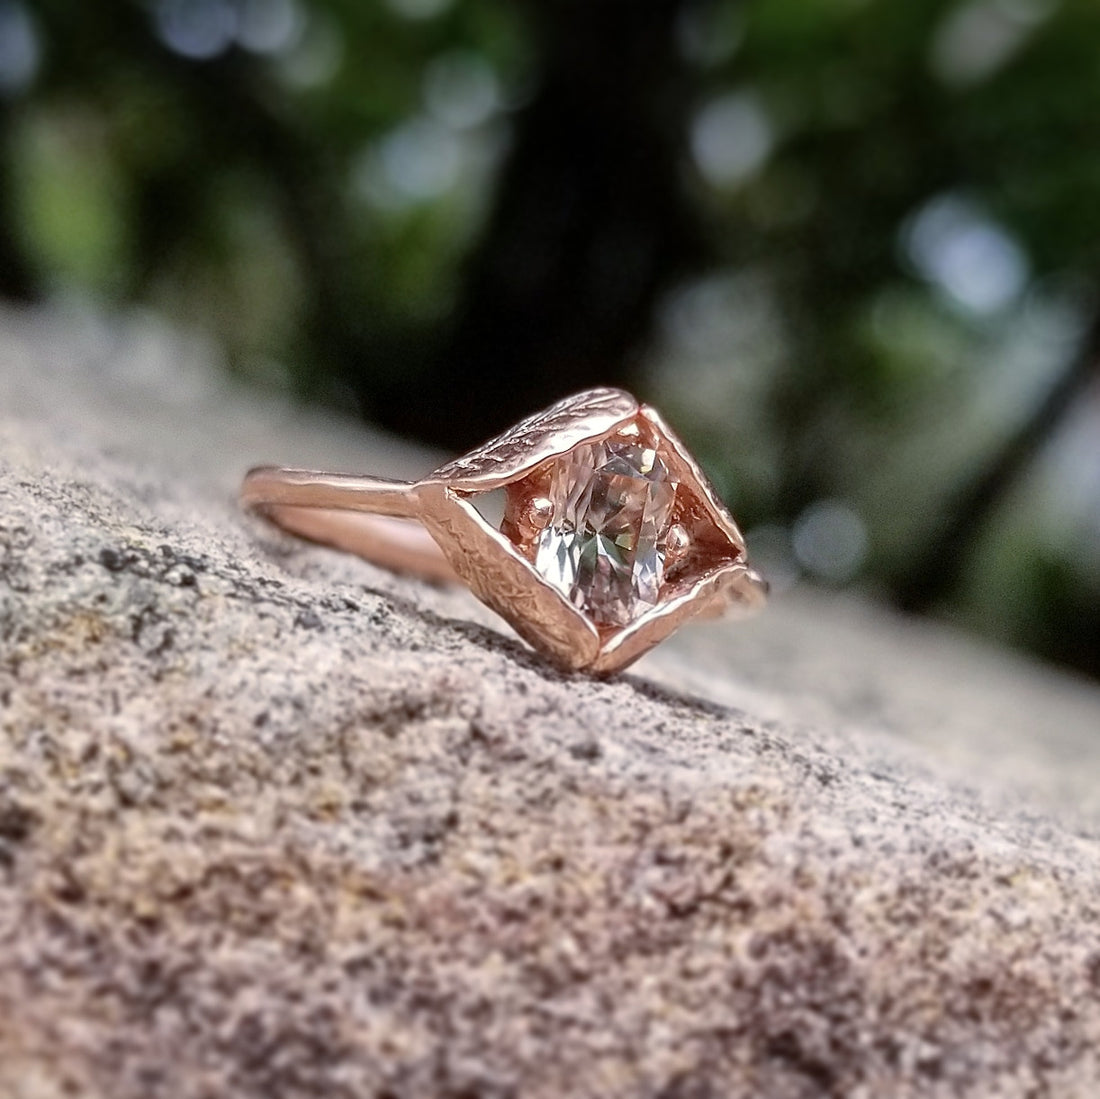 Dryad Ring with Zircon